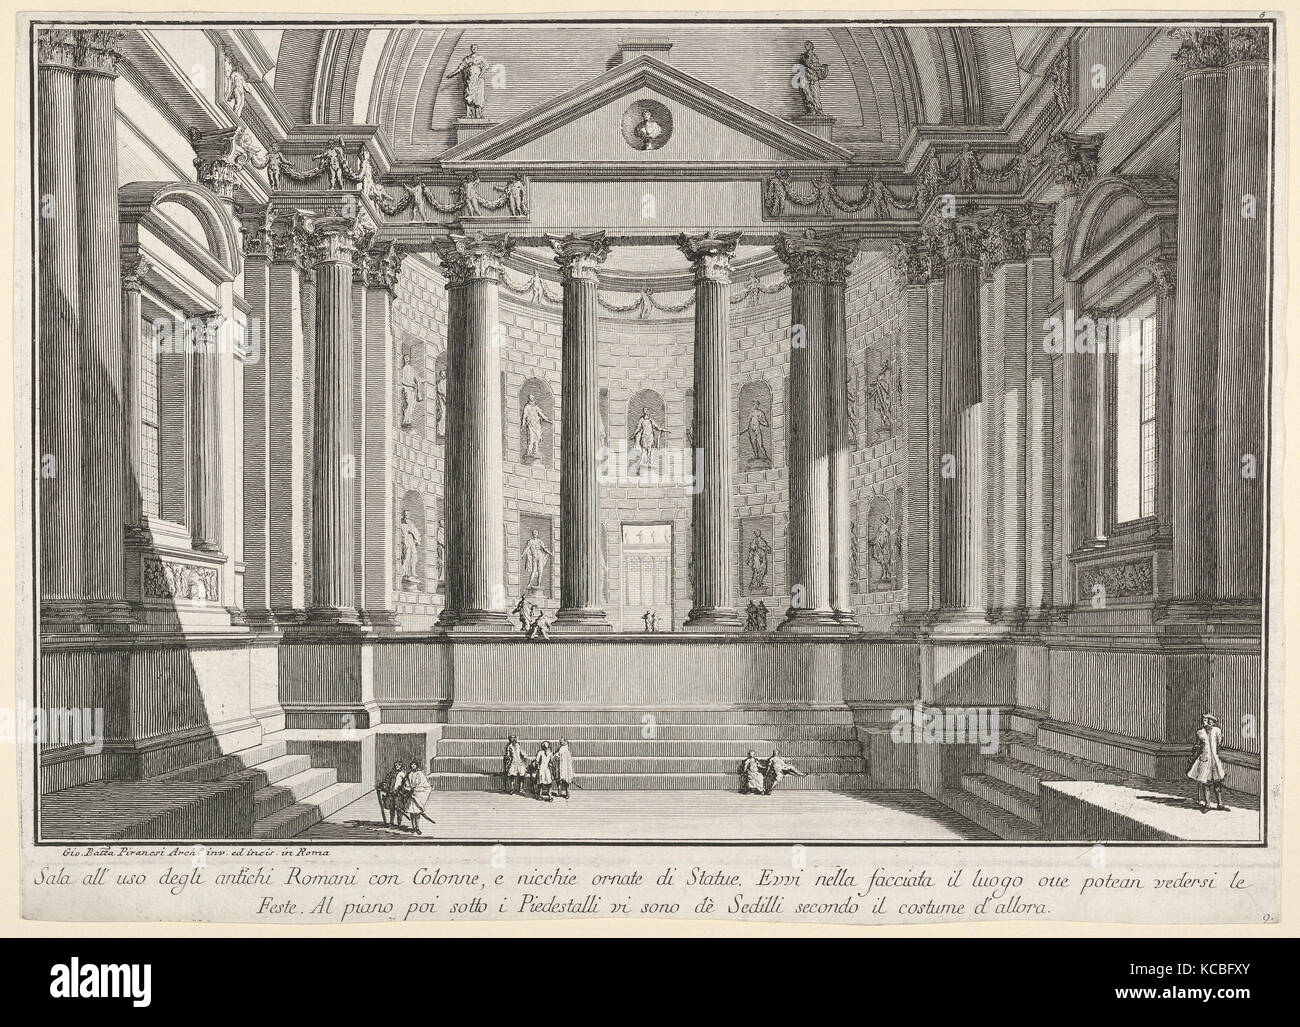 Plate 9: 'Colonnaded hall according to the custom of the ancient Romans, and niches adorned witn statues' (Sala all'uso degli Stock Photo